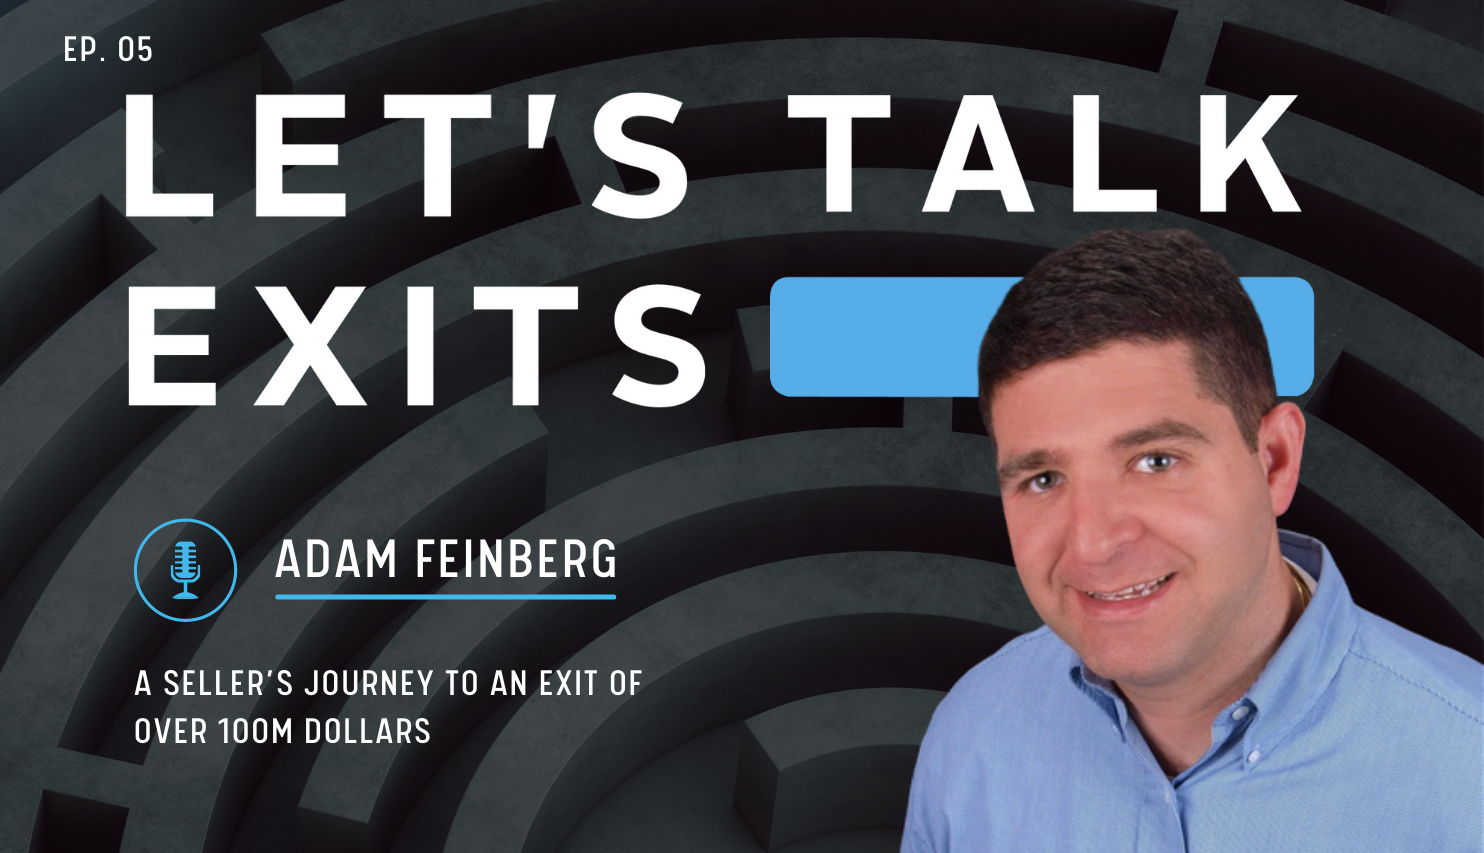 A Seller’s Journey to an Exit of Over 100M Dollars with Adam Feinberg